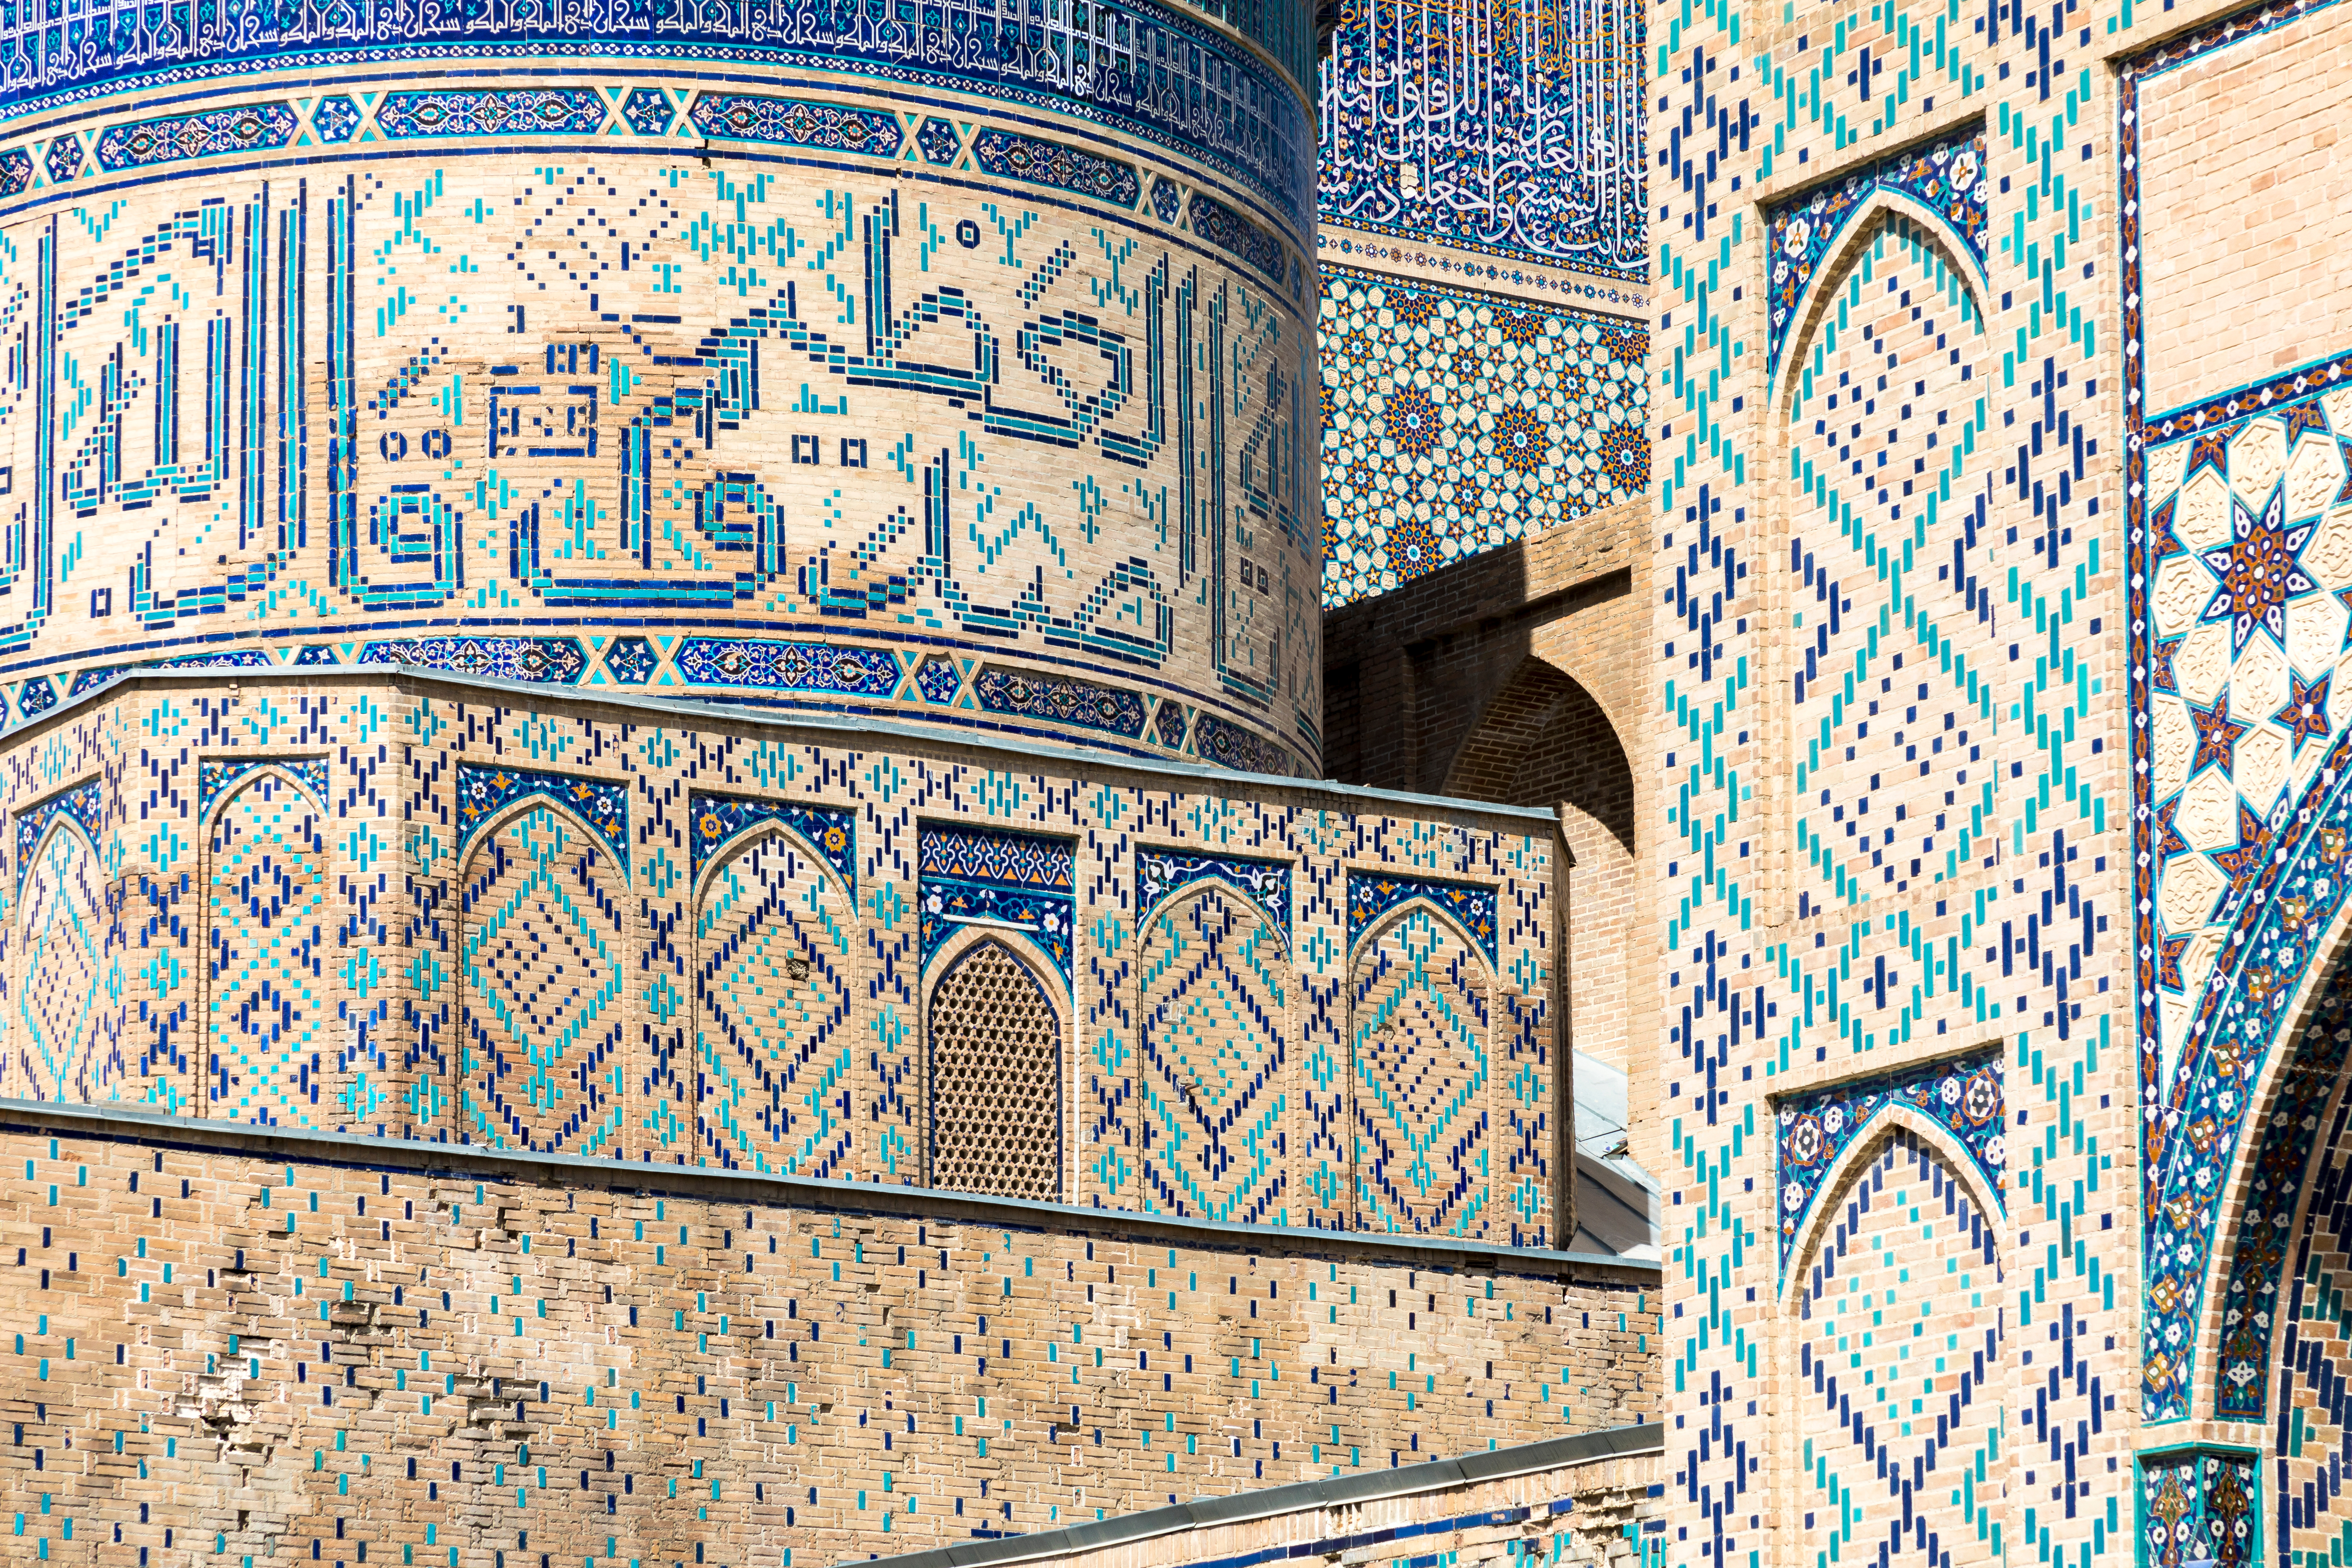 Intricate blue and purple tiling creating geometric shapes and Arabic words © Curioso.Photography / Shutterstock